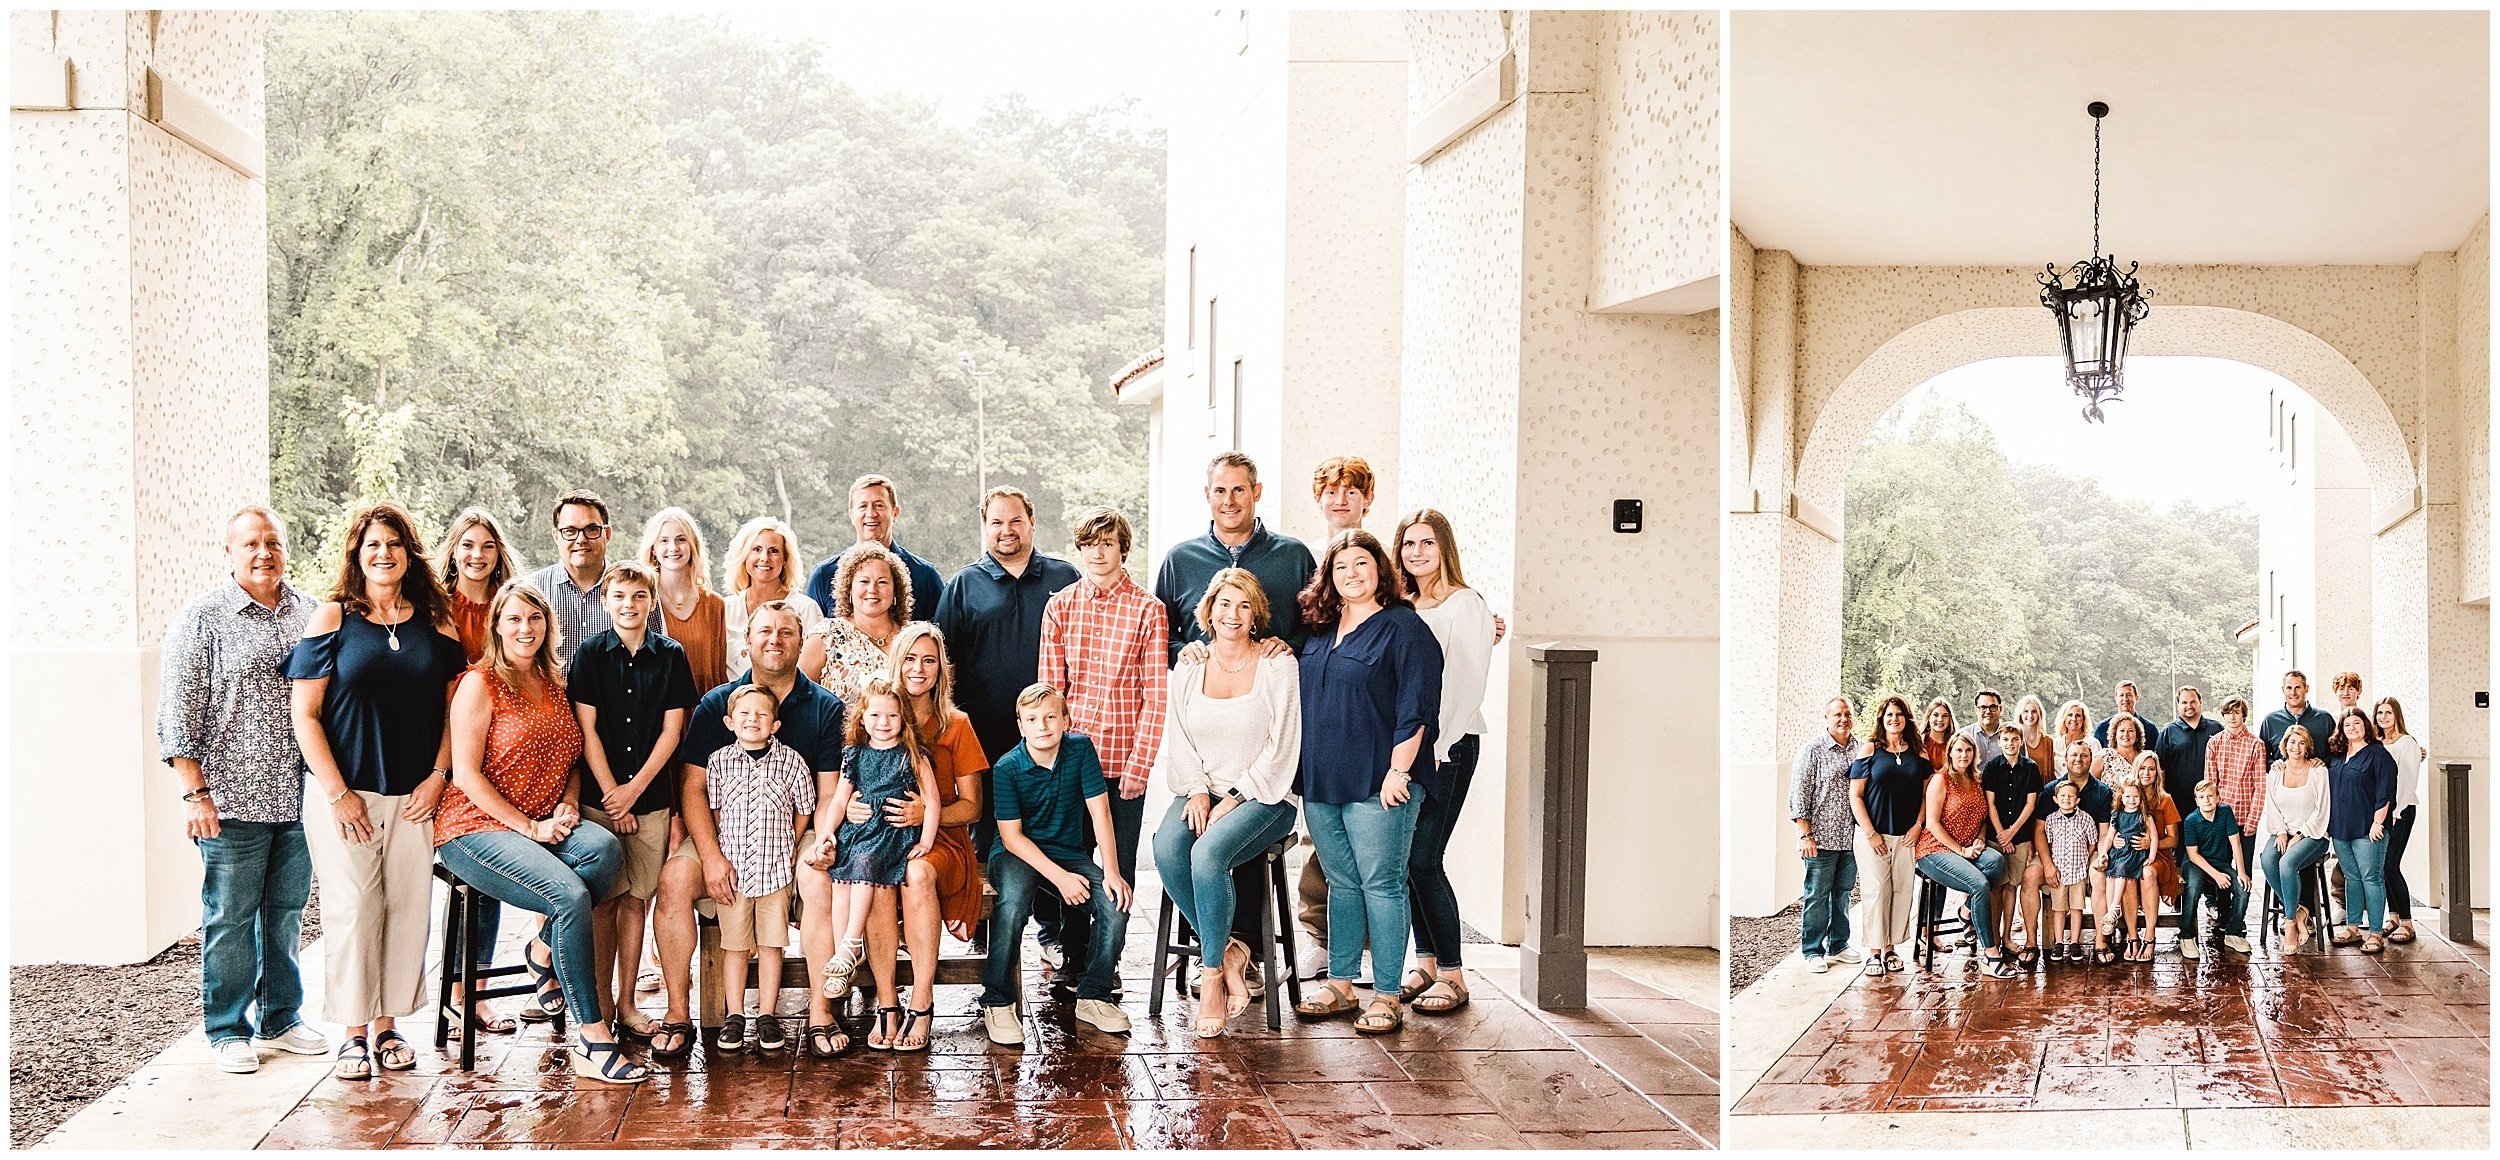 extended family photography indianapolis Indiana 